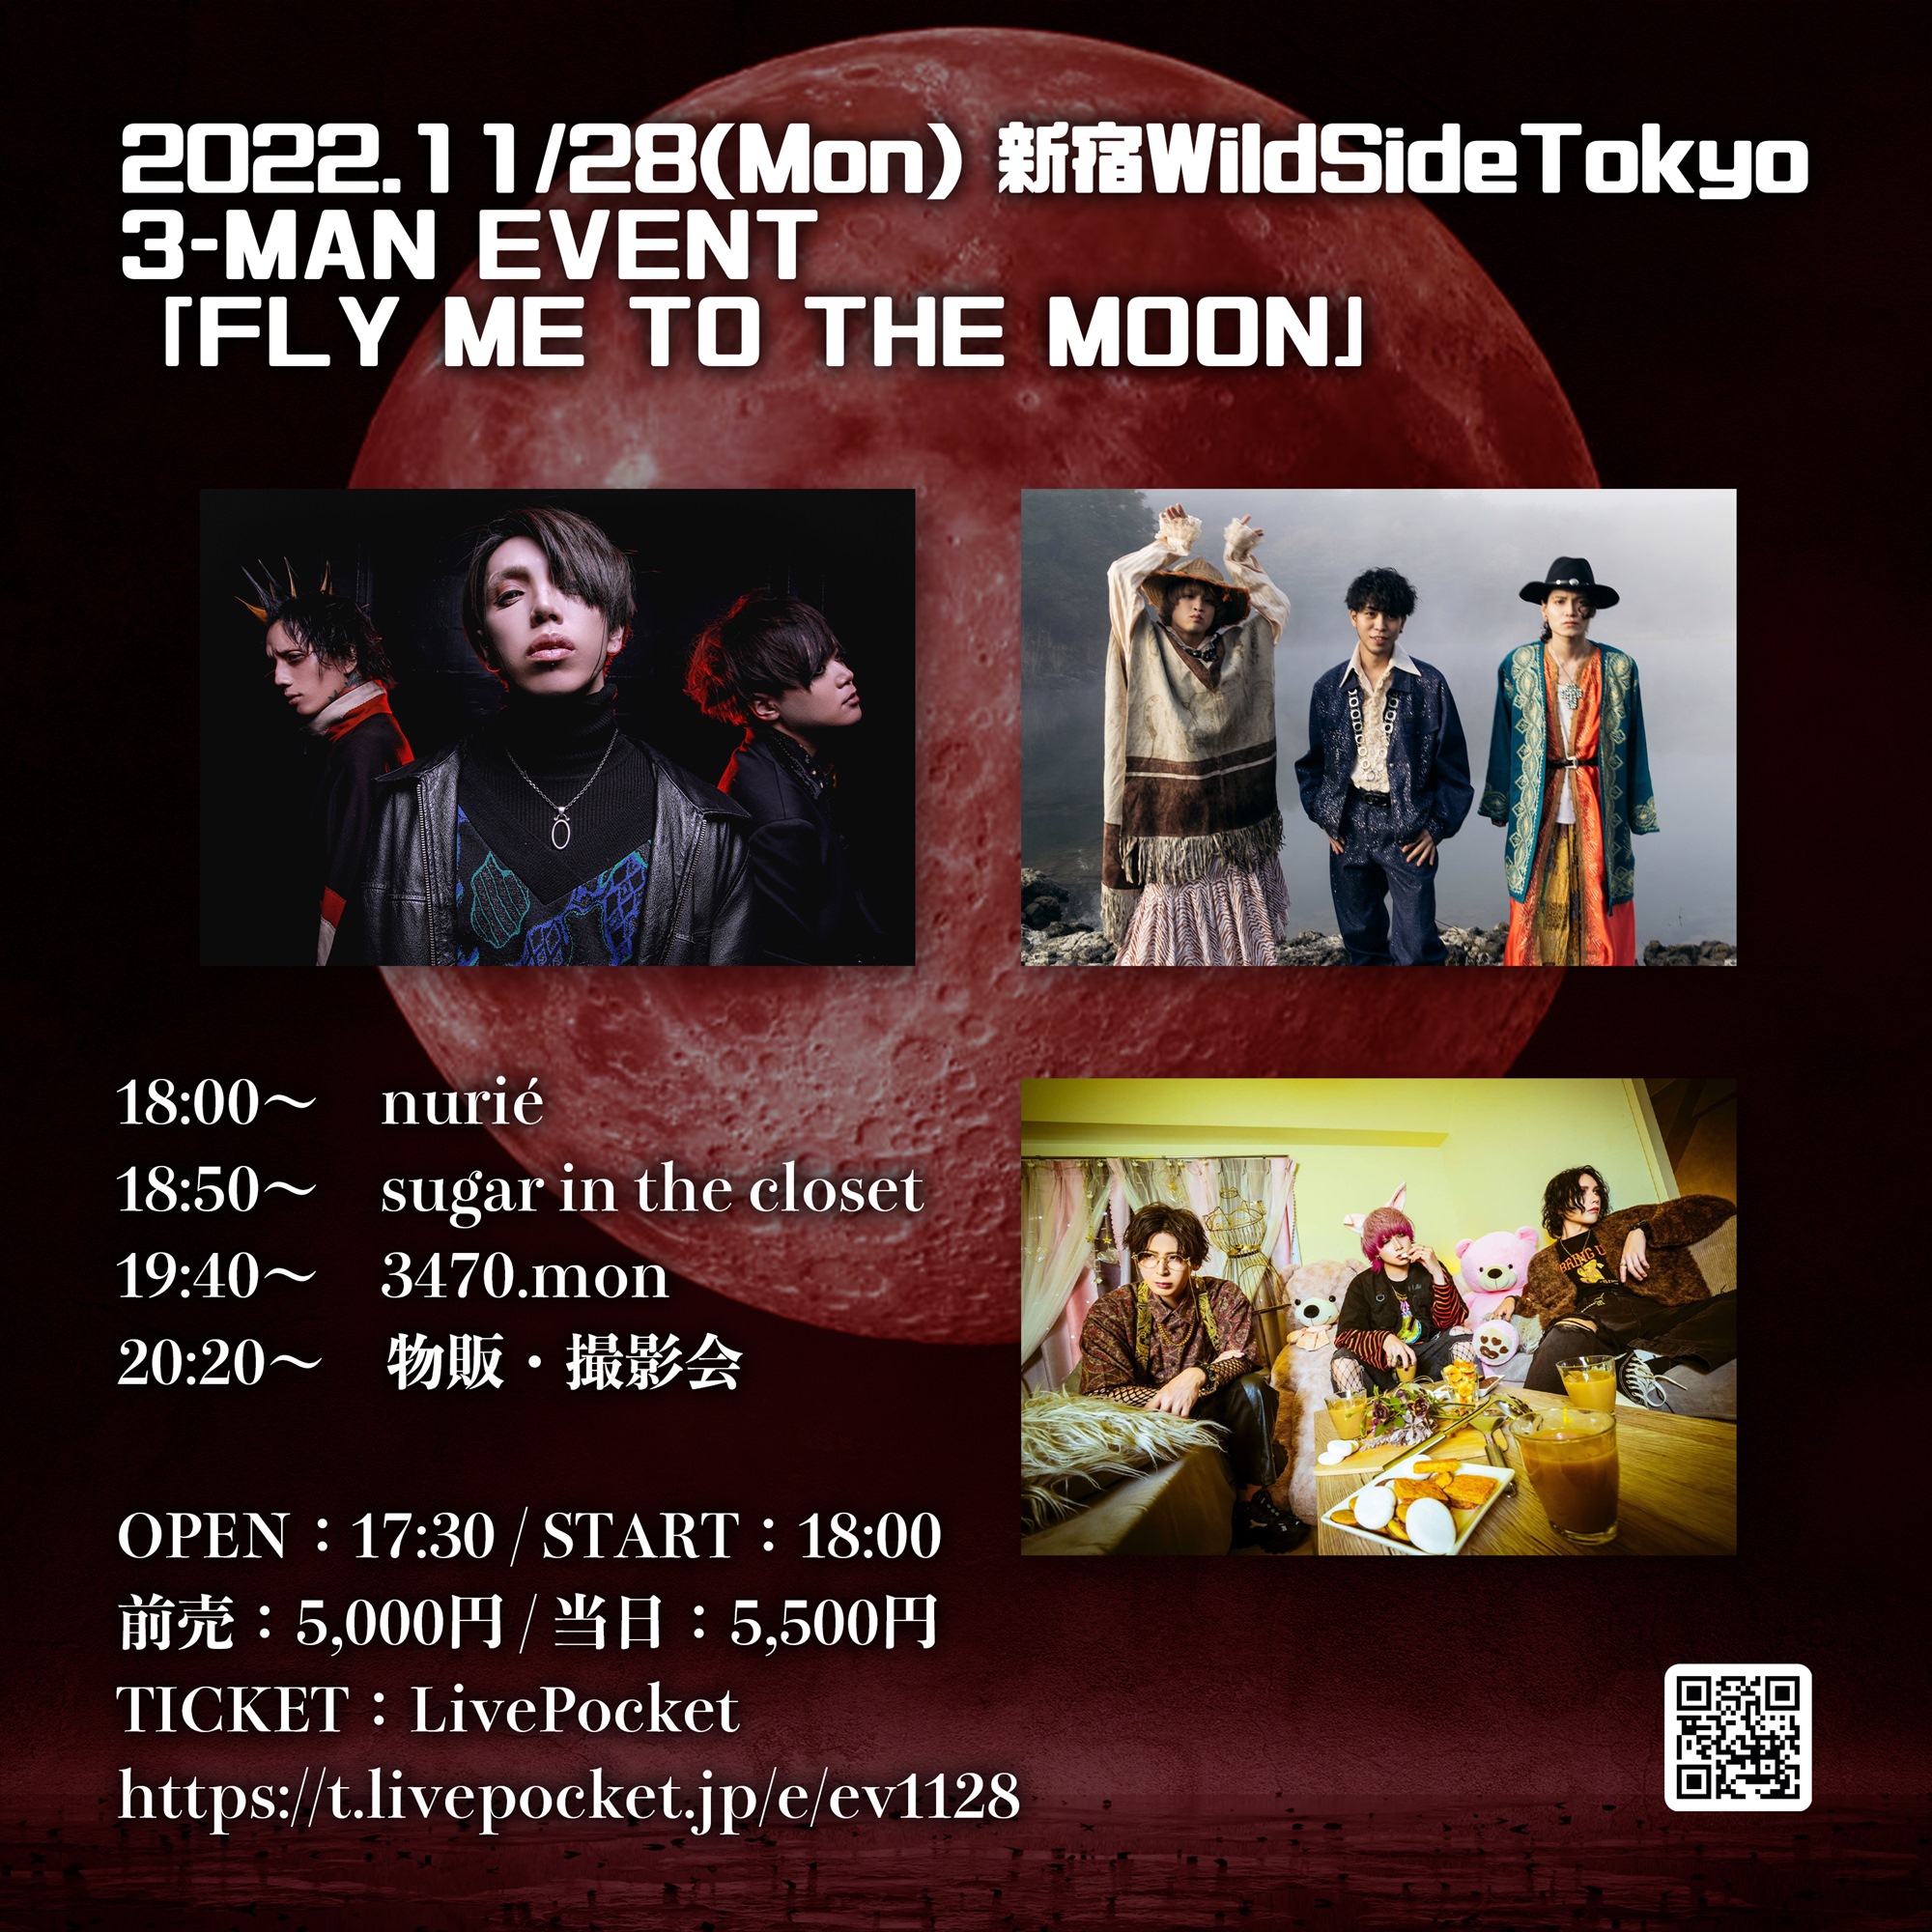 3470.mon 3-MAN EVENT「FLY ME TO THE MOON」